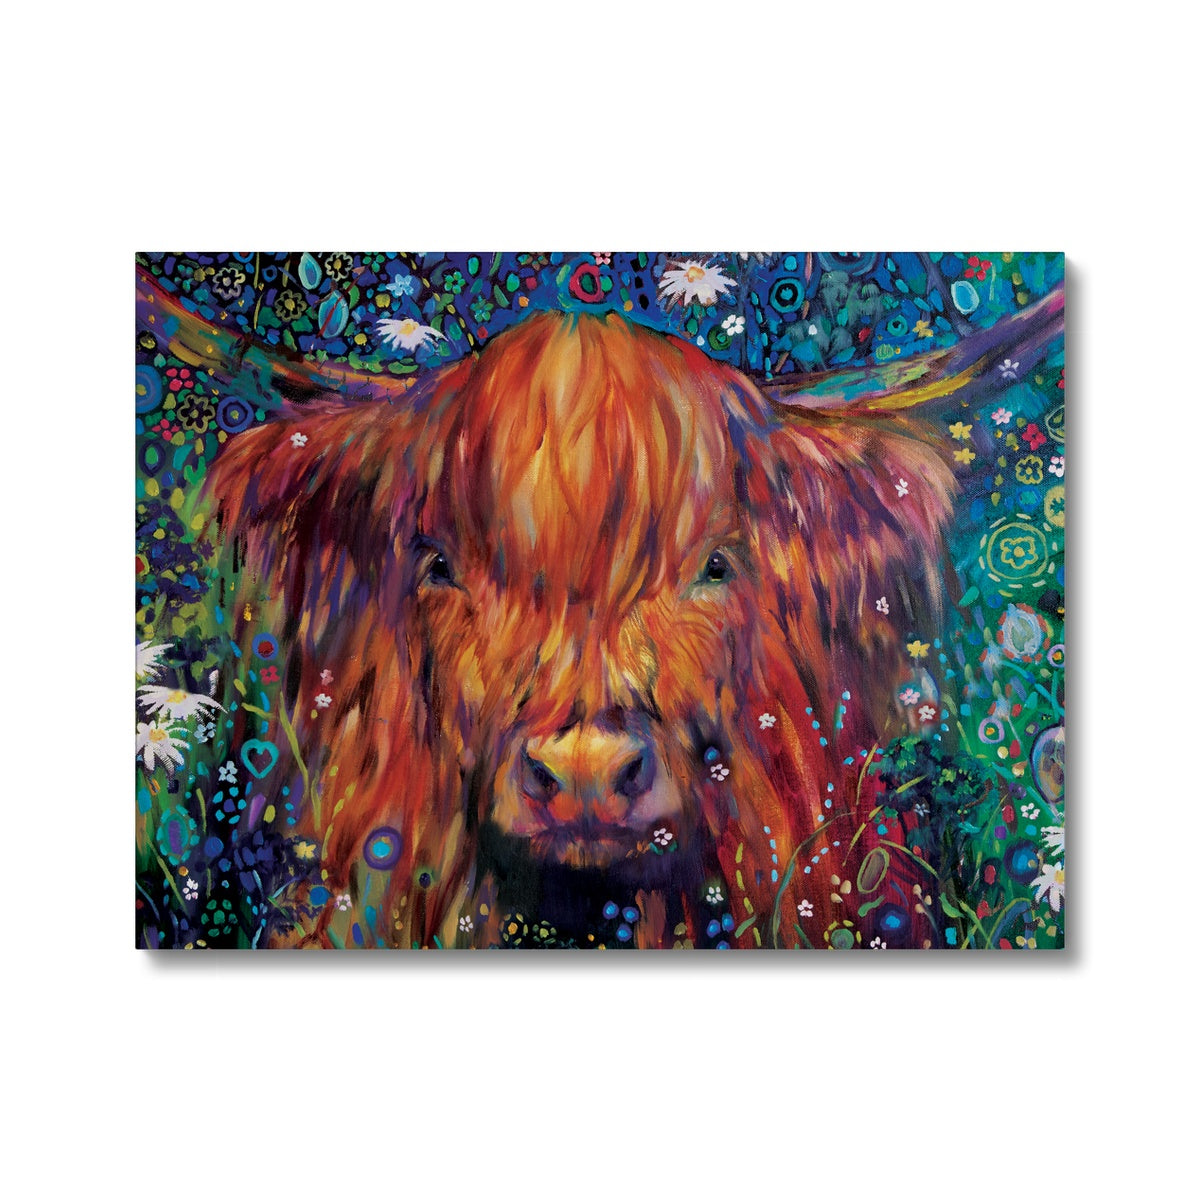 Highland Cow art with daisies by sue gardner